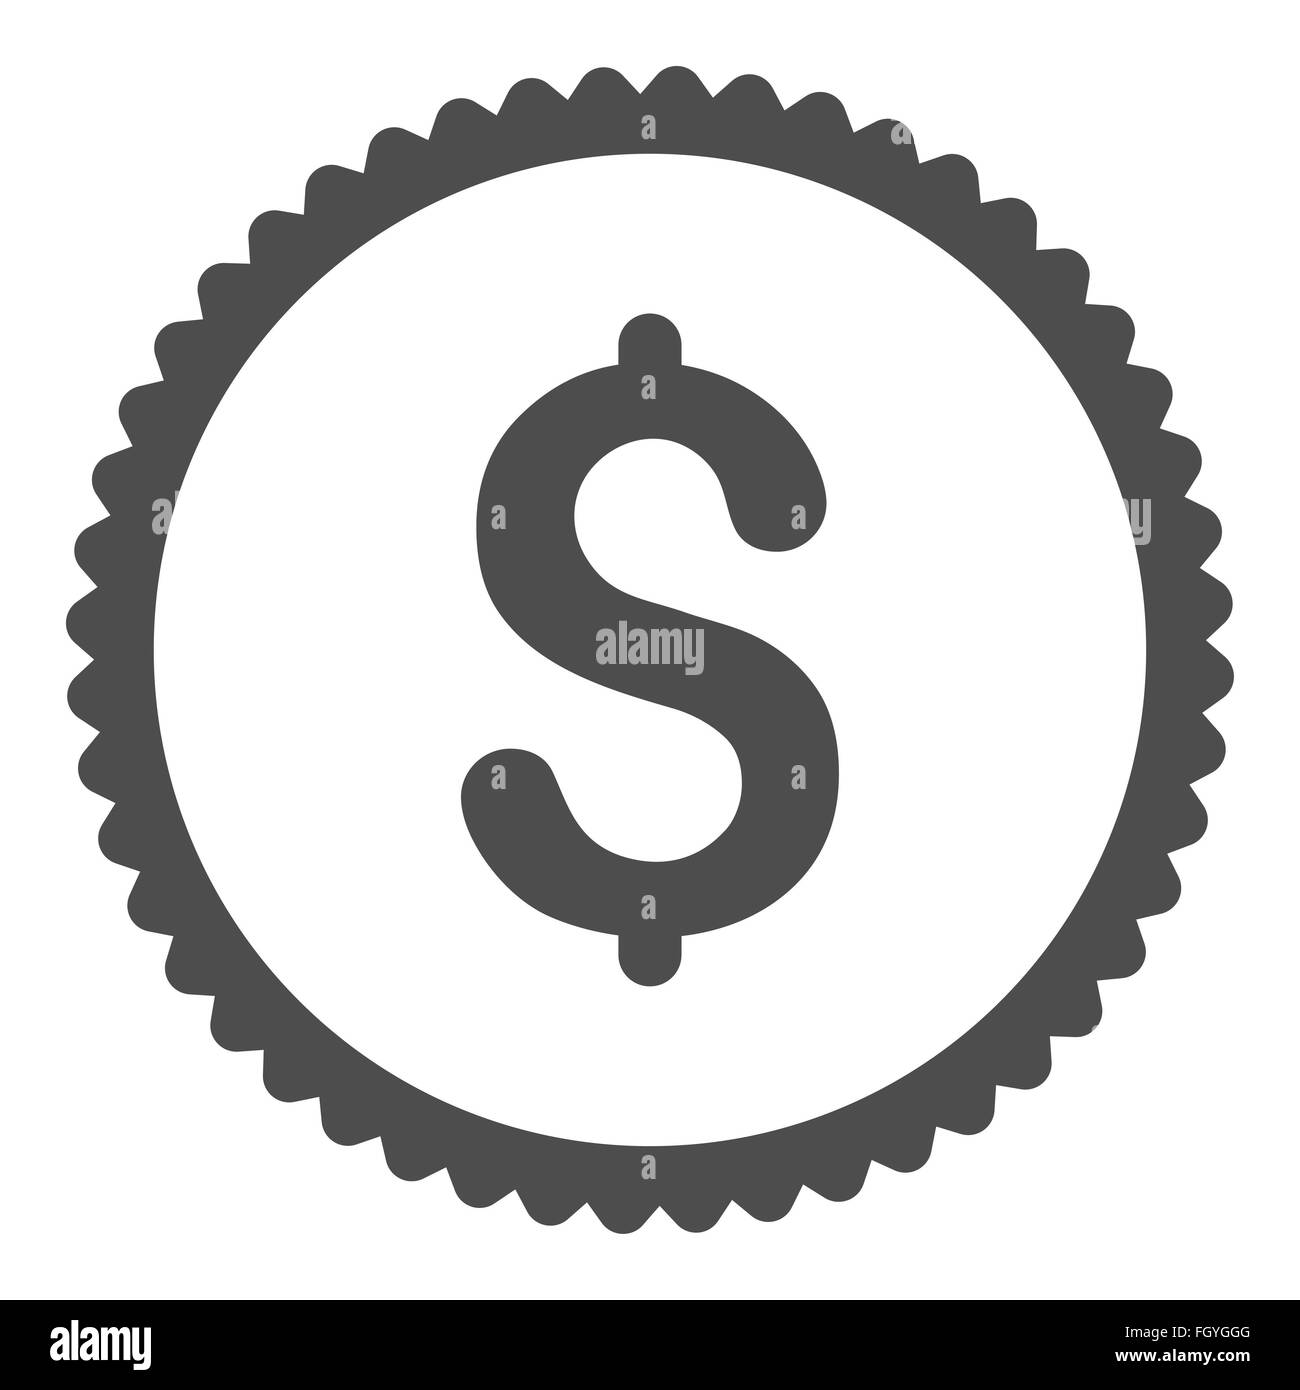 Dollar flat gray color round stamp icon Stock Photo